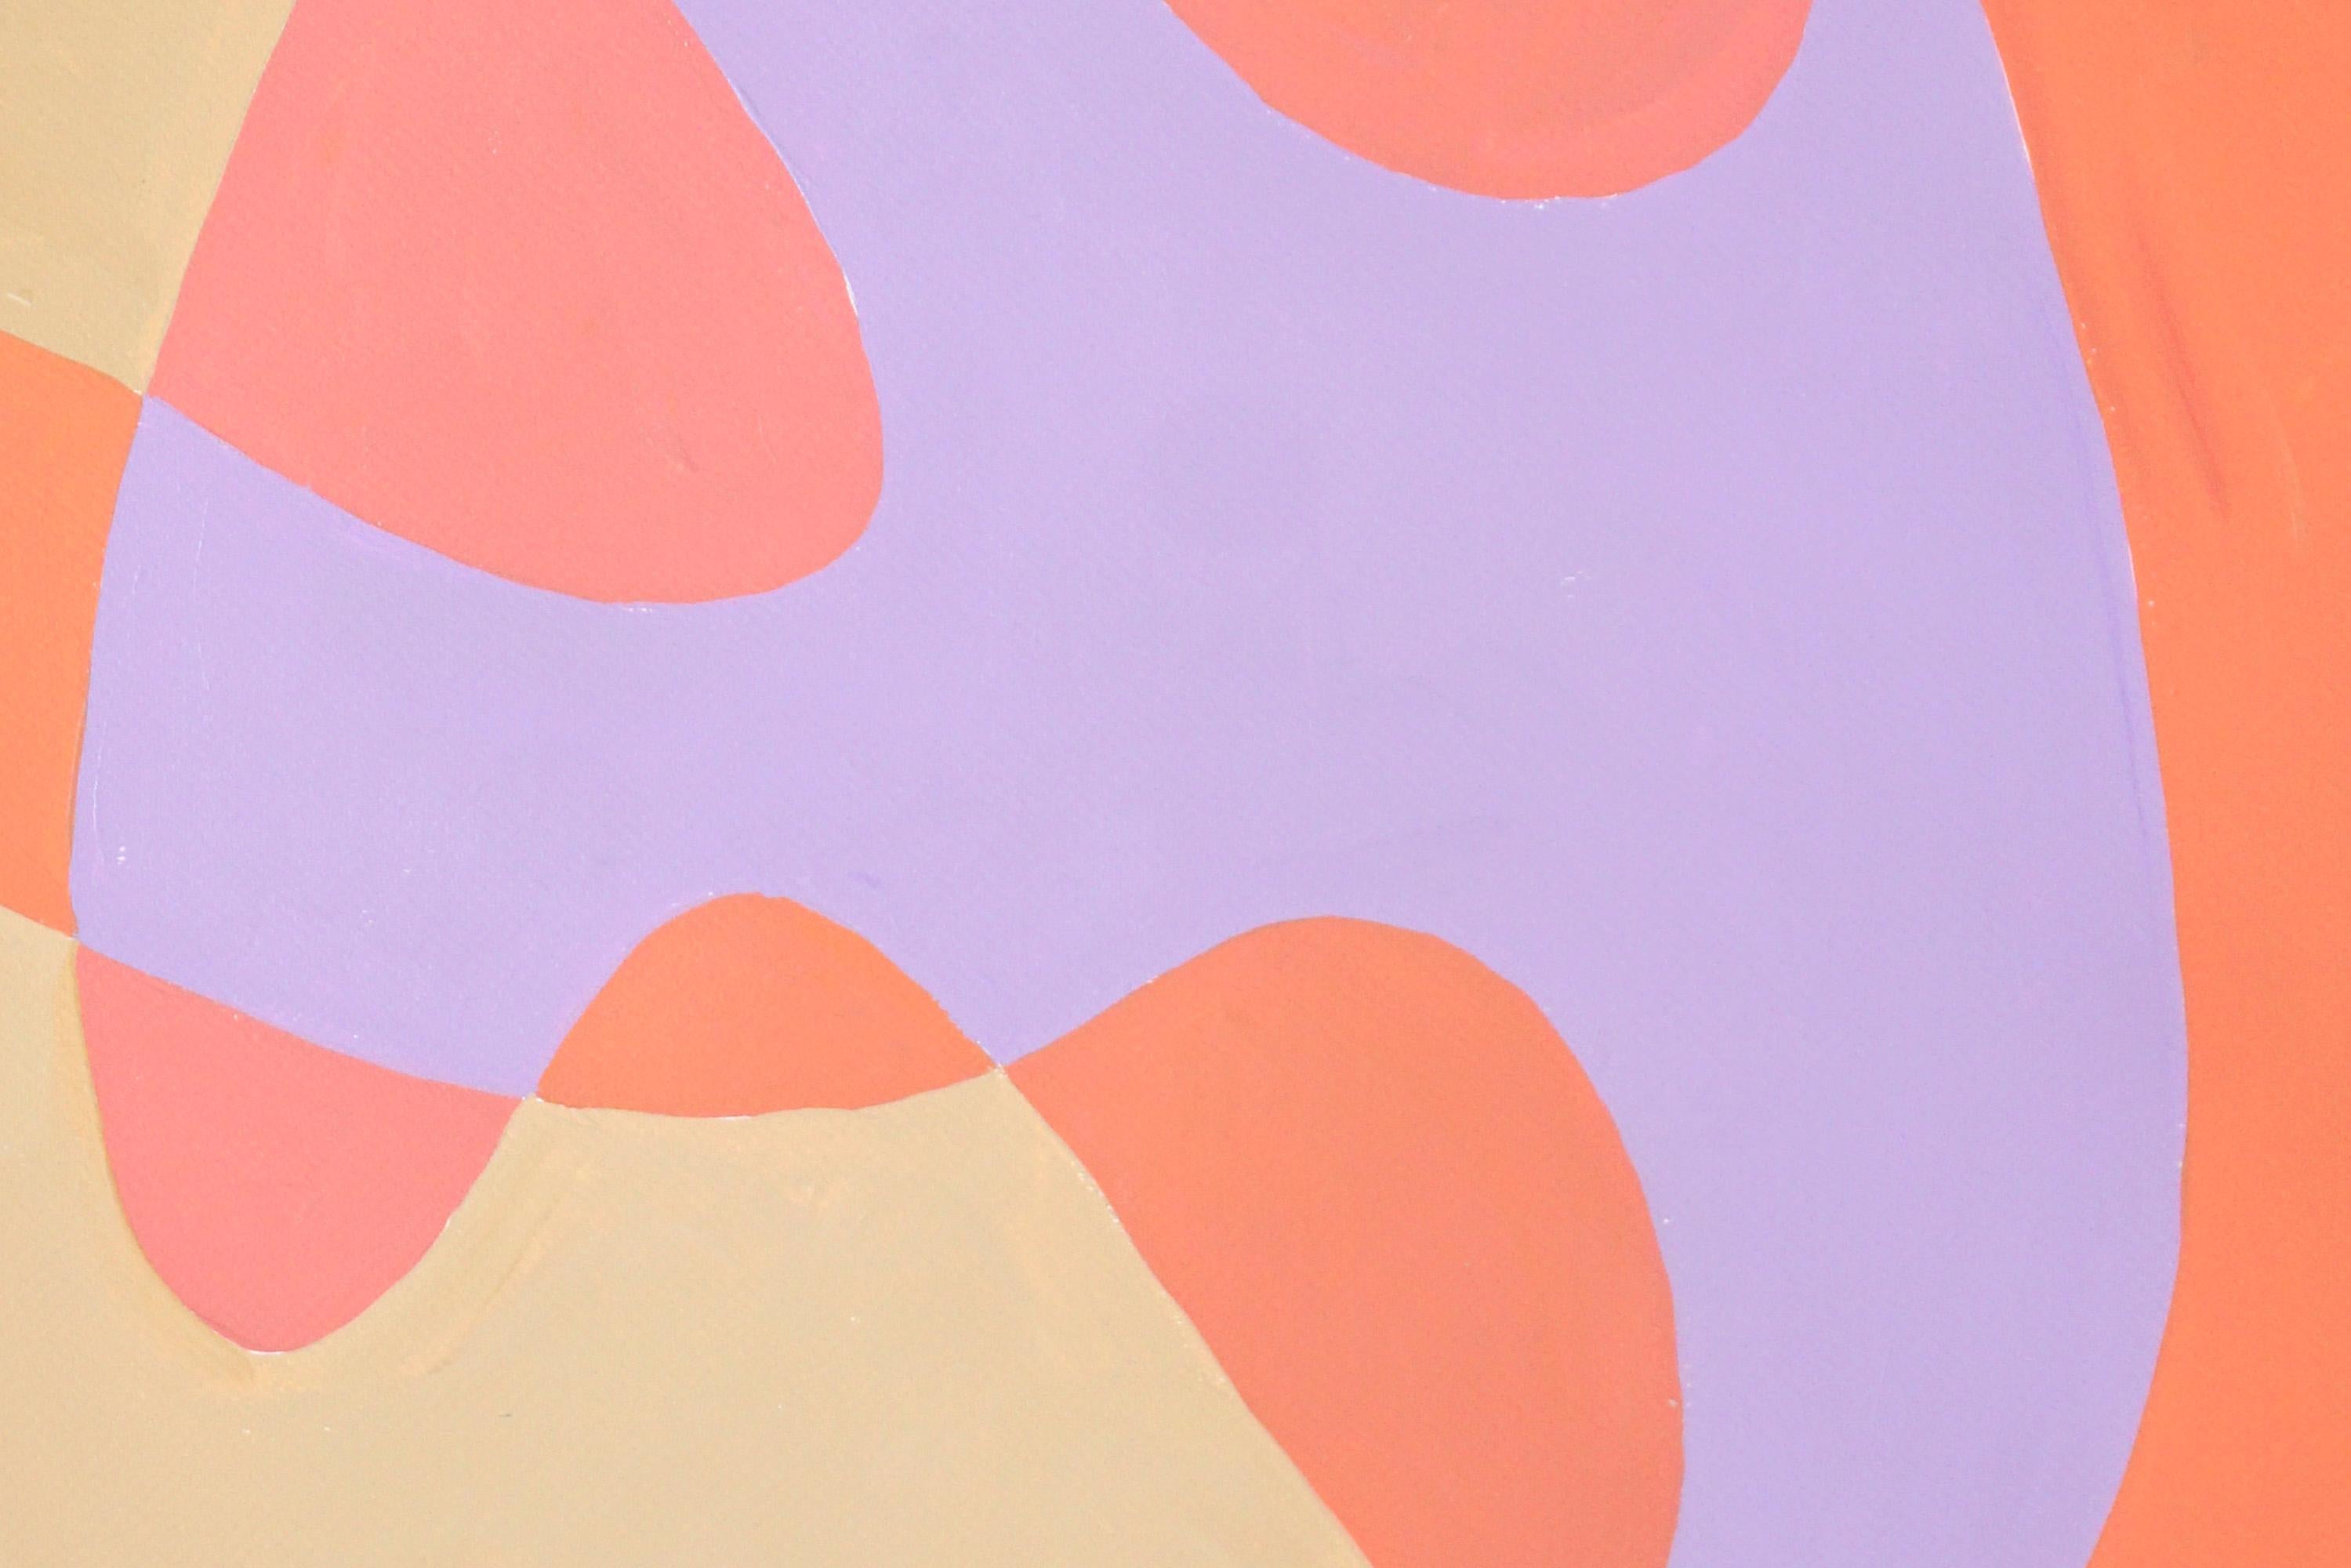 Coral Reef Abstraction, Pastel Tones Triptych Pink and Mauve, Post-Modern Shapes 7